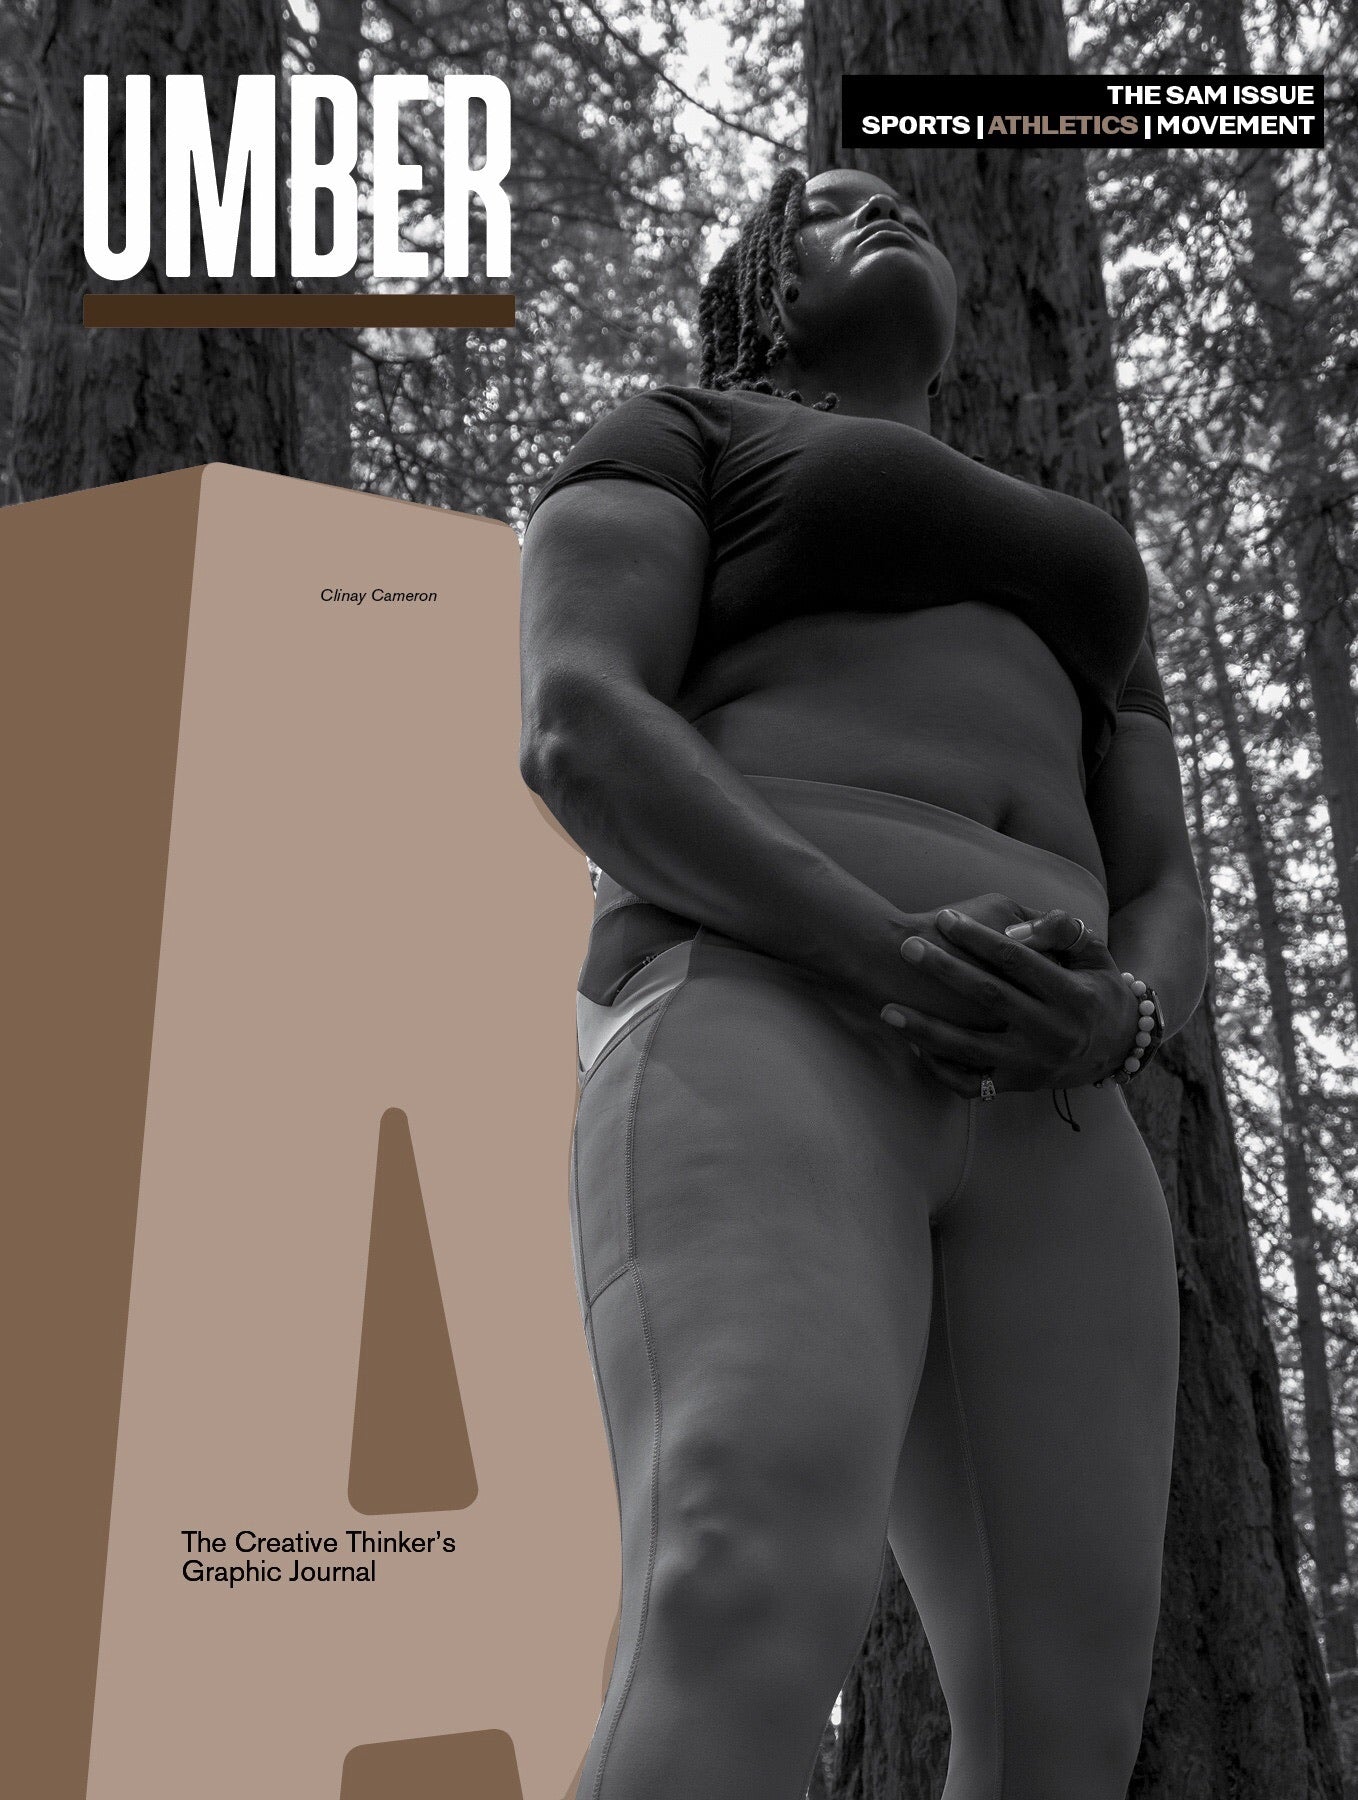 UMBER Magazine // The S.A.M. Issue: Athletics